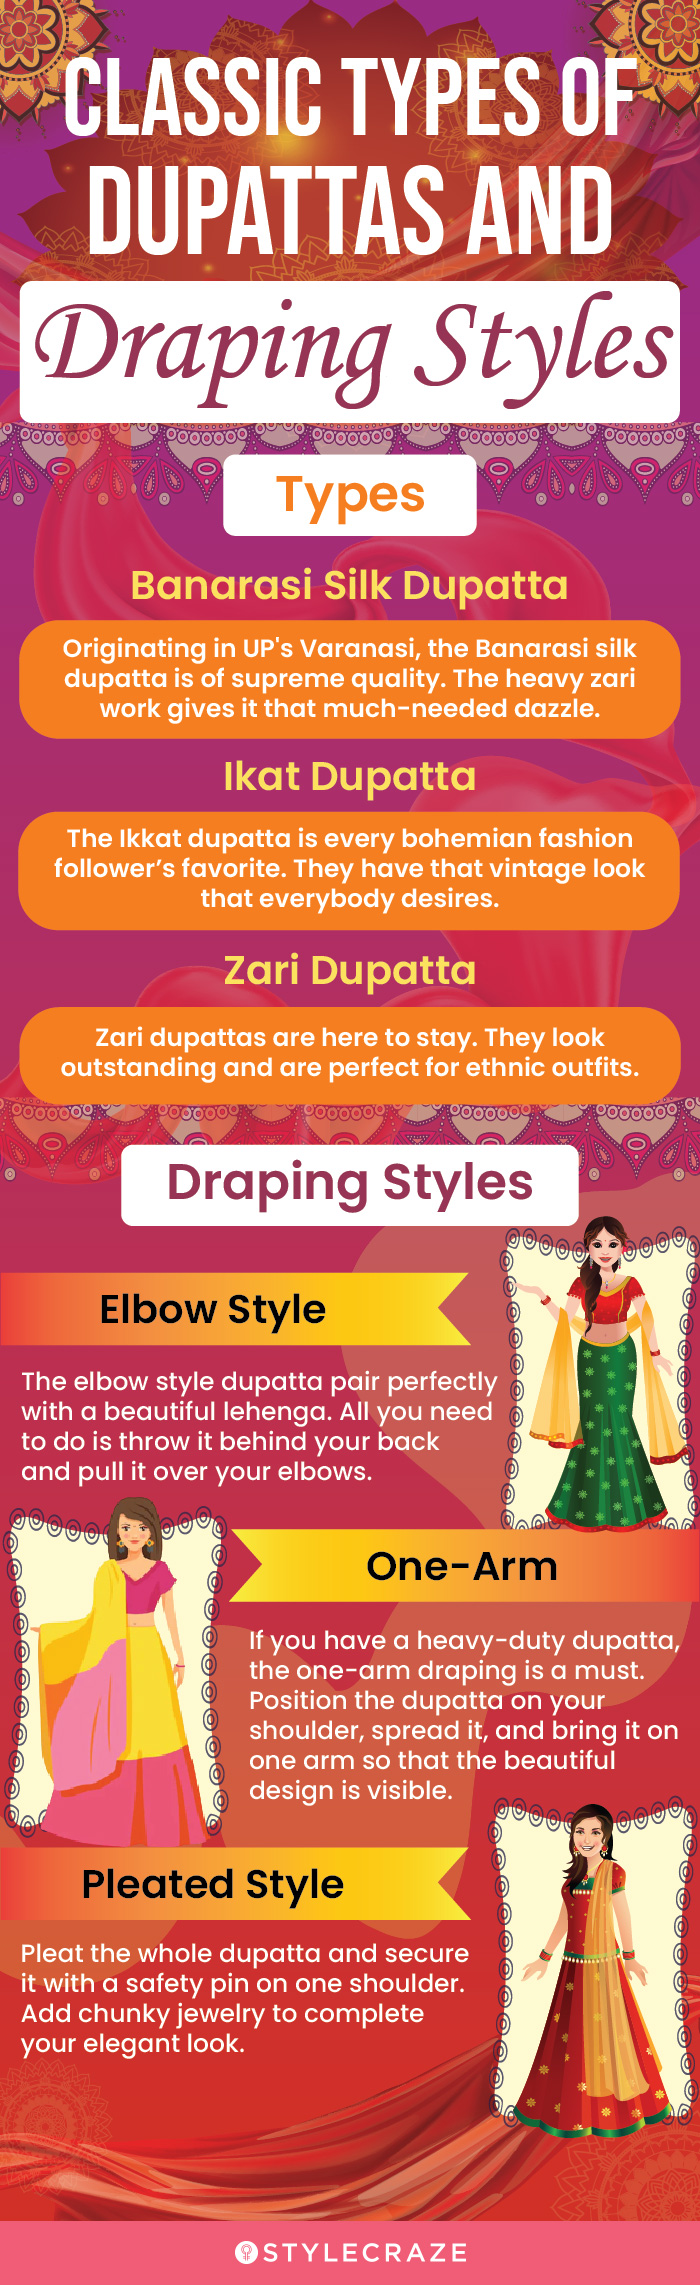 classic types of dupattas and draping styles (infographic)